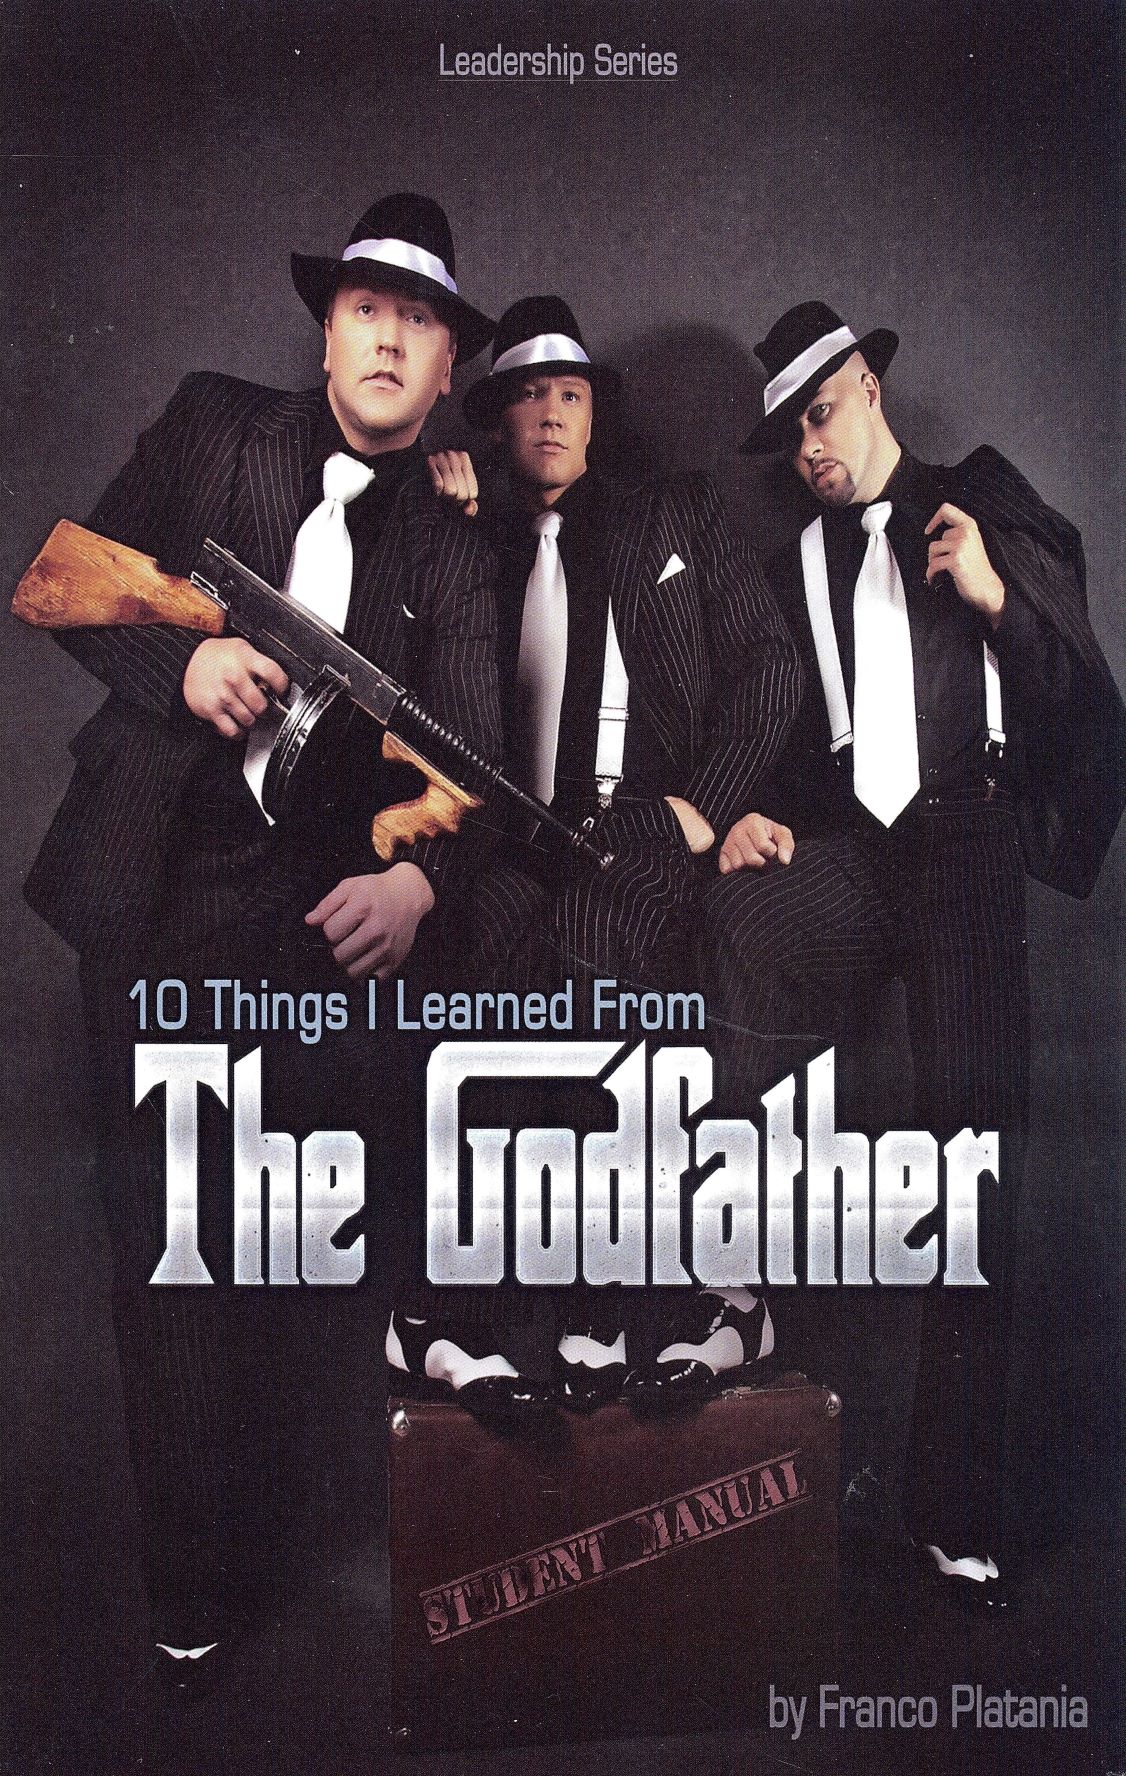 Leadership Series: 10 Lessons I Learned From The Godfather (Student manual)